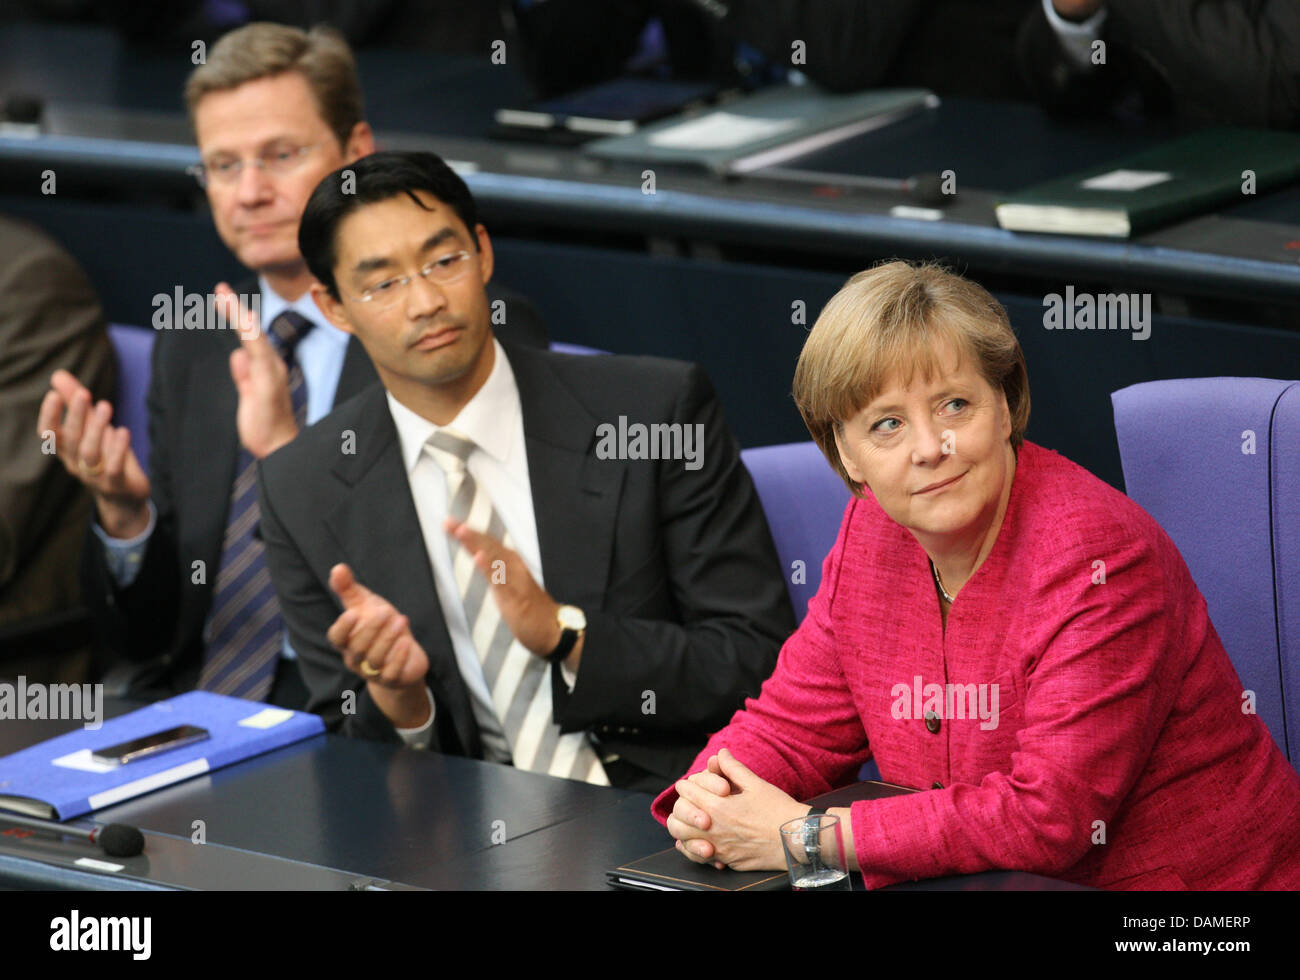 Chancellor Angela Merkel recieves applause from Economy Minister Philipp Roesler (C) and Foreign Minister Guido Westerwelle (L) at the Bundestag in Berlin, Germany, 09 June 2011. Earlier, Chancellor Merkel made a governmental statement on energy politics. Photo: Doreen Fiedler Stock Photo